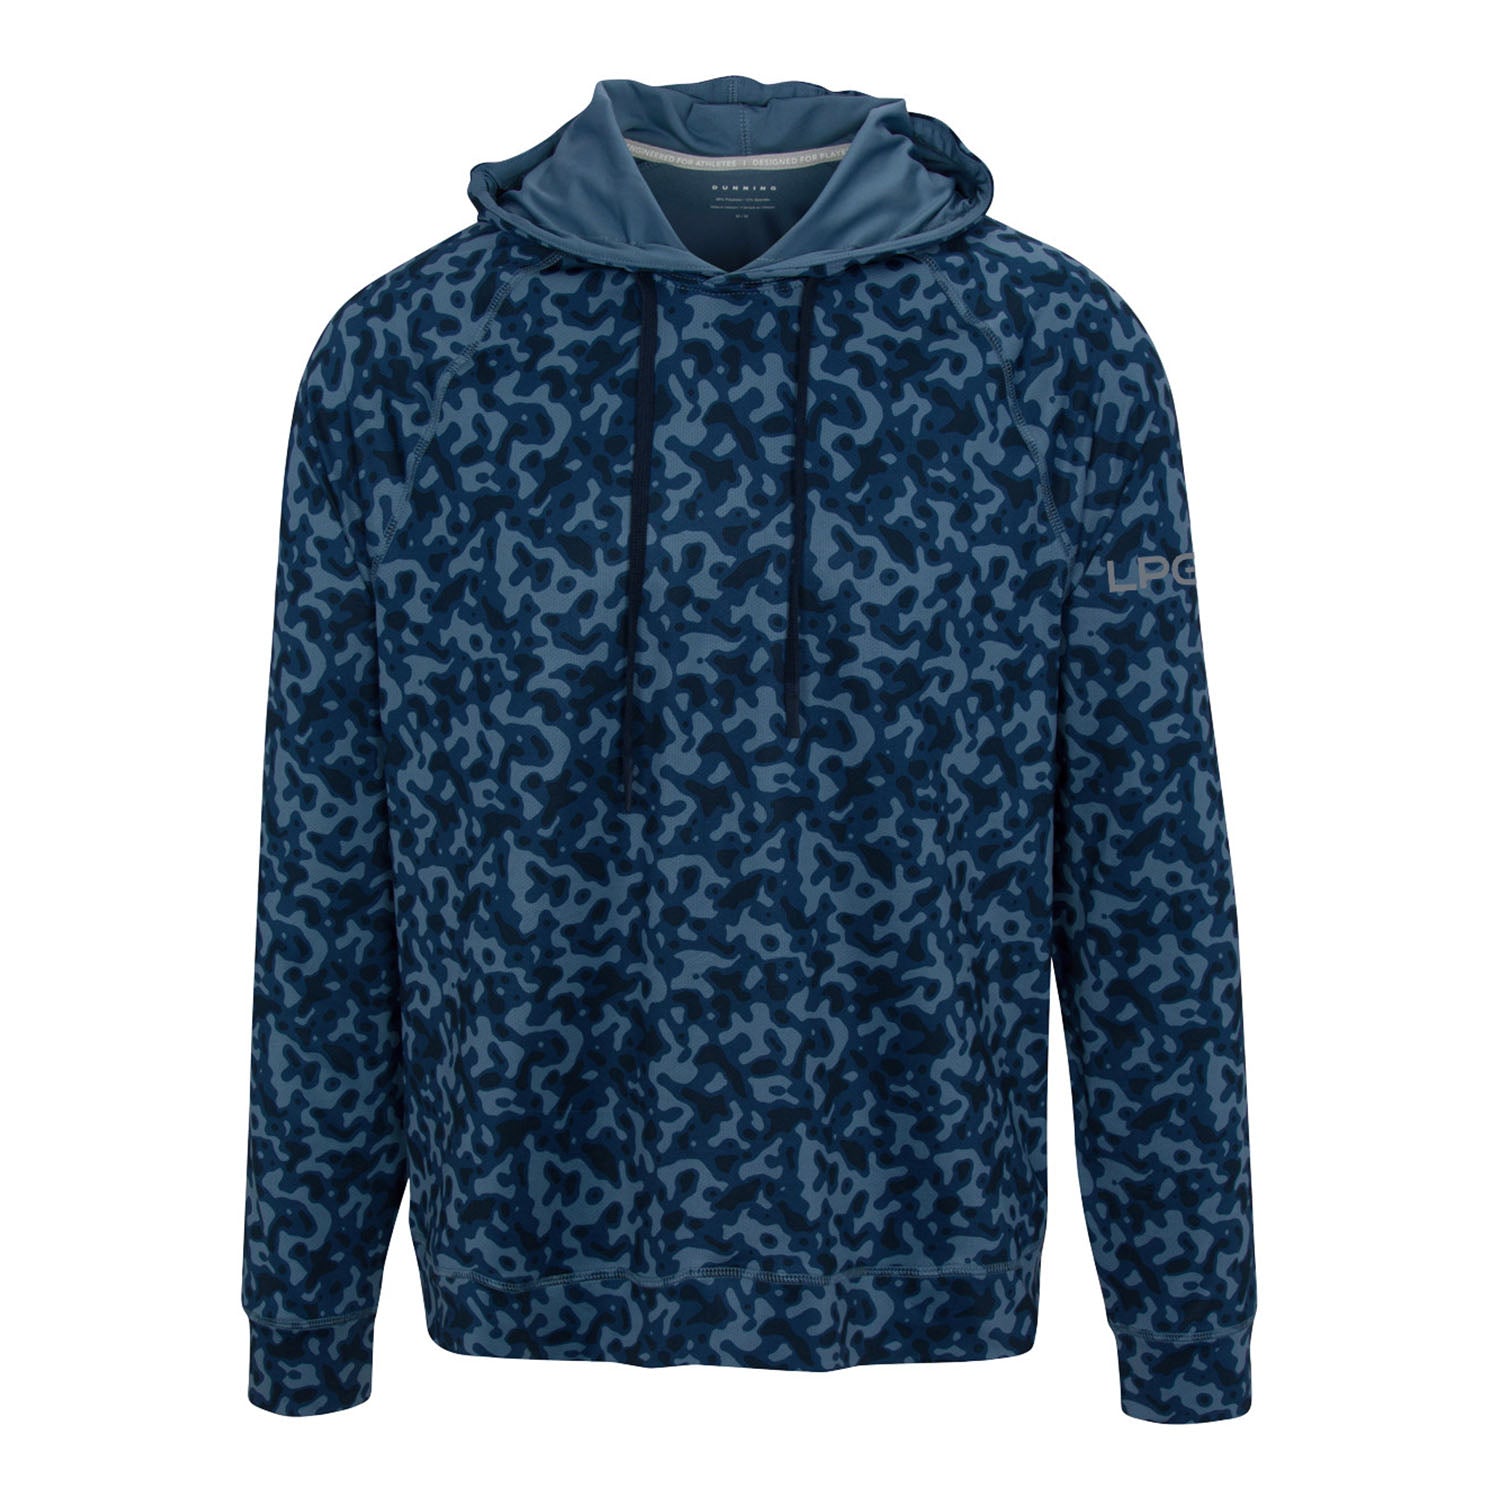 Dunning 2023 LPGA Golf Men's Quest Ventilated Camoflage Mesh Performance Hoodie in Blue - Front View